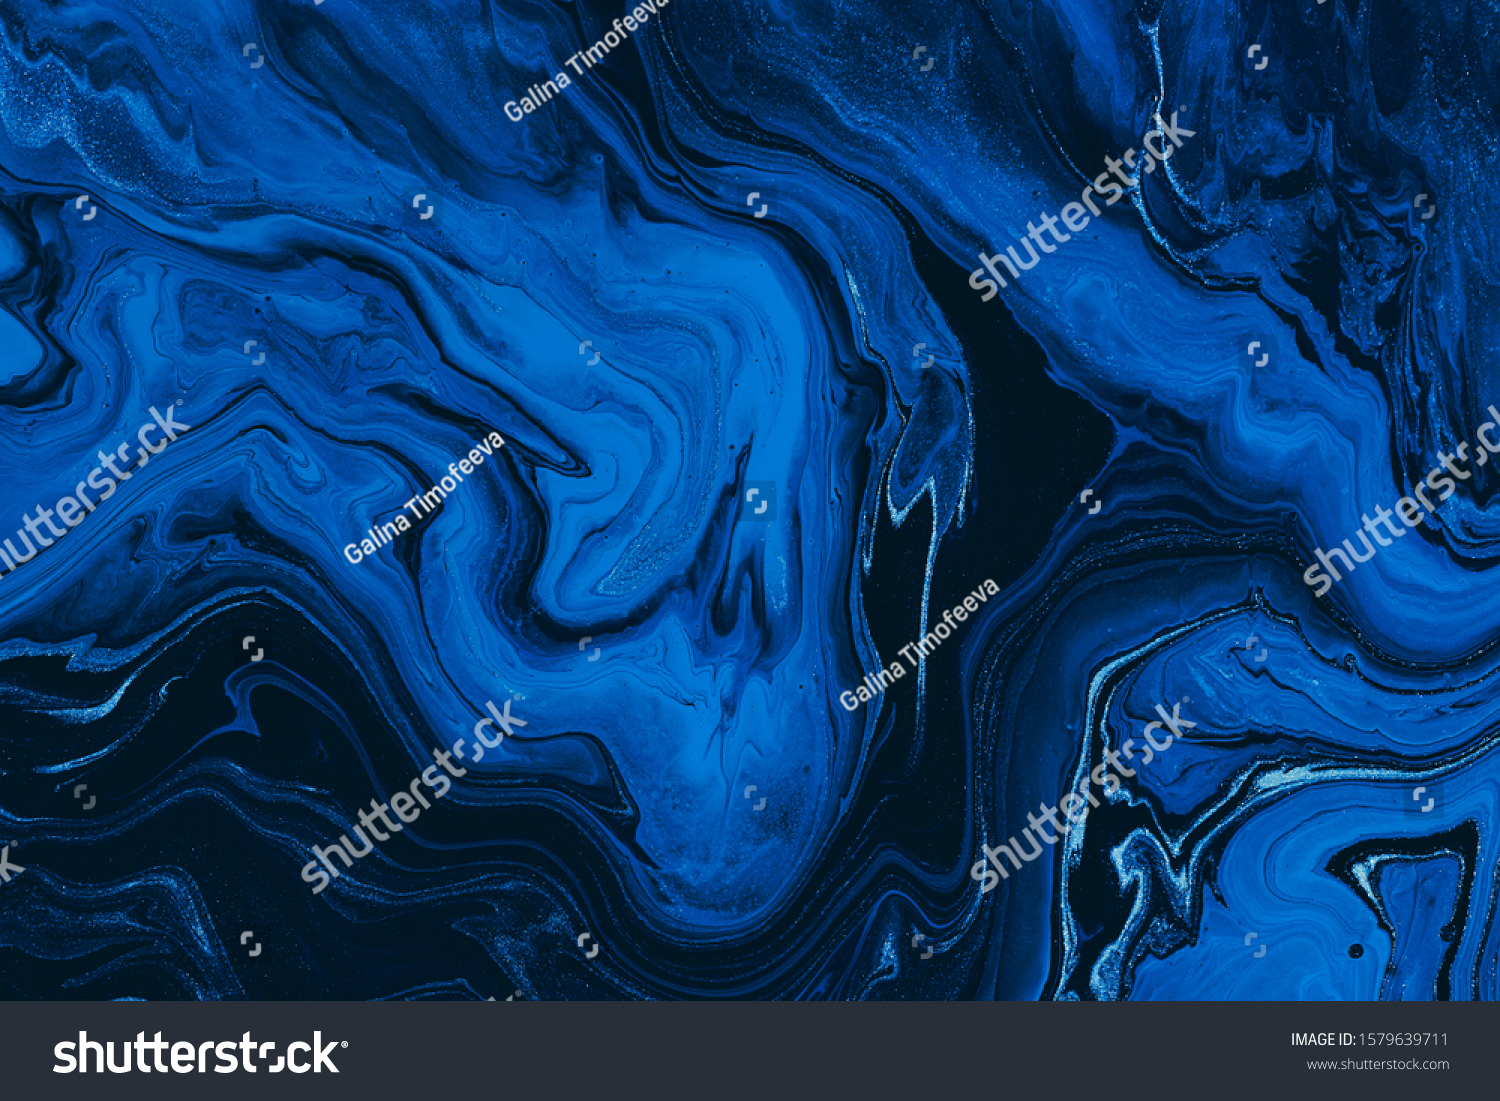 Classic blue color of the year 2020. Abstract fluid acrylic painting. Modern art. Marbled blue abstract background. Liquid marble pattern #1579639711